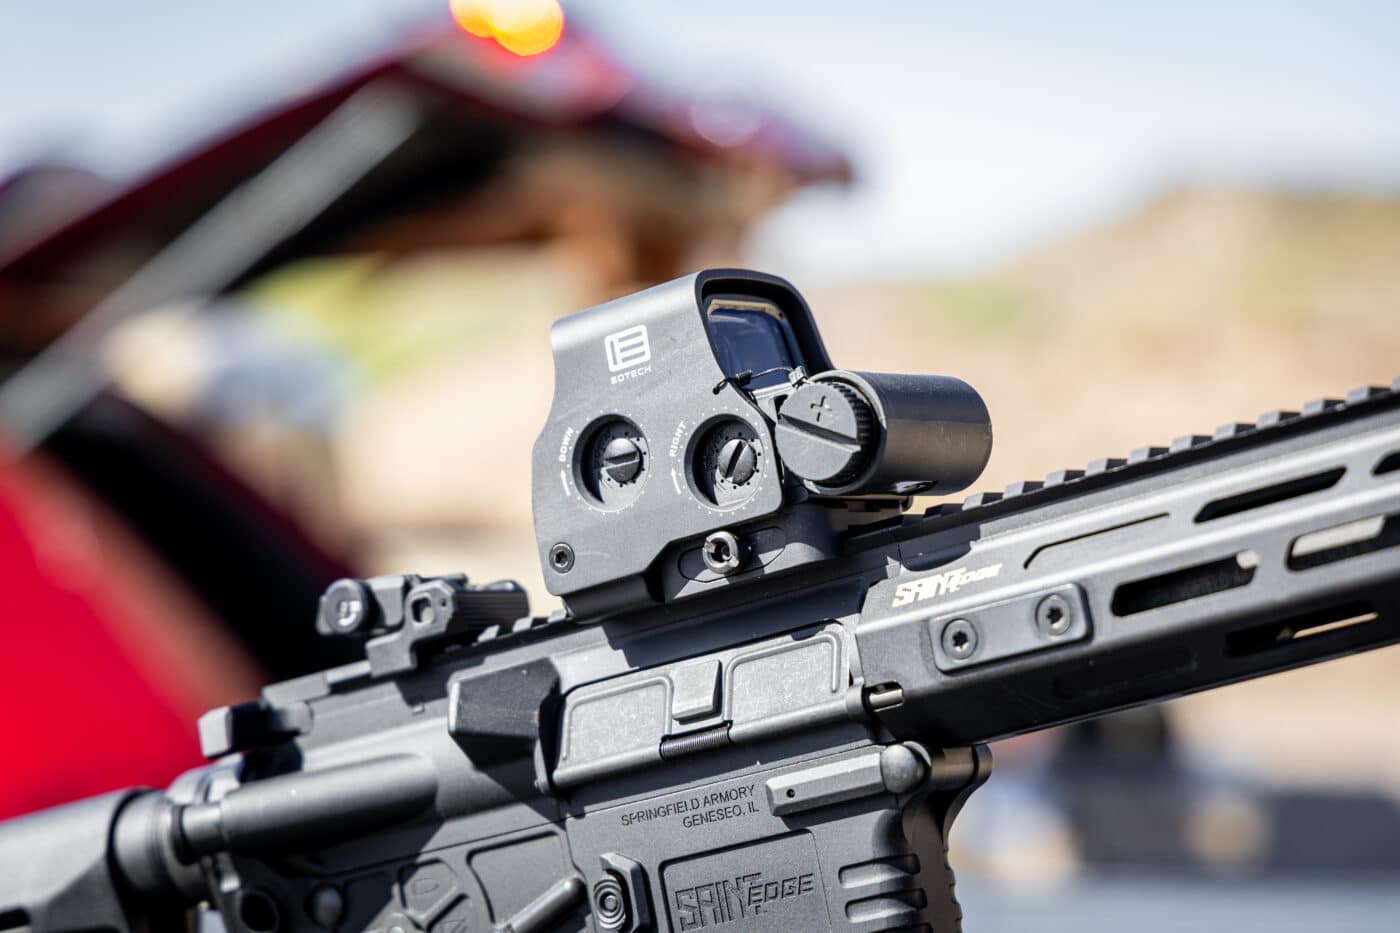 eotech exps2 reviewed on saint rifle